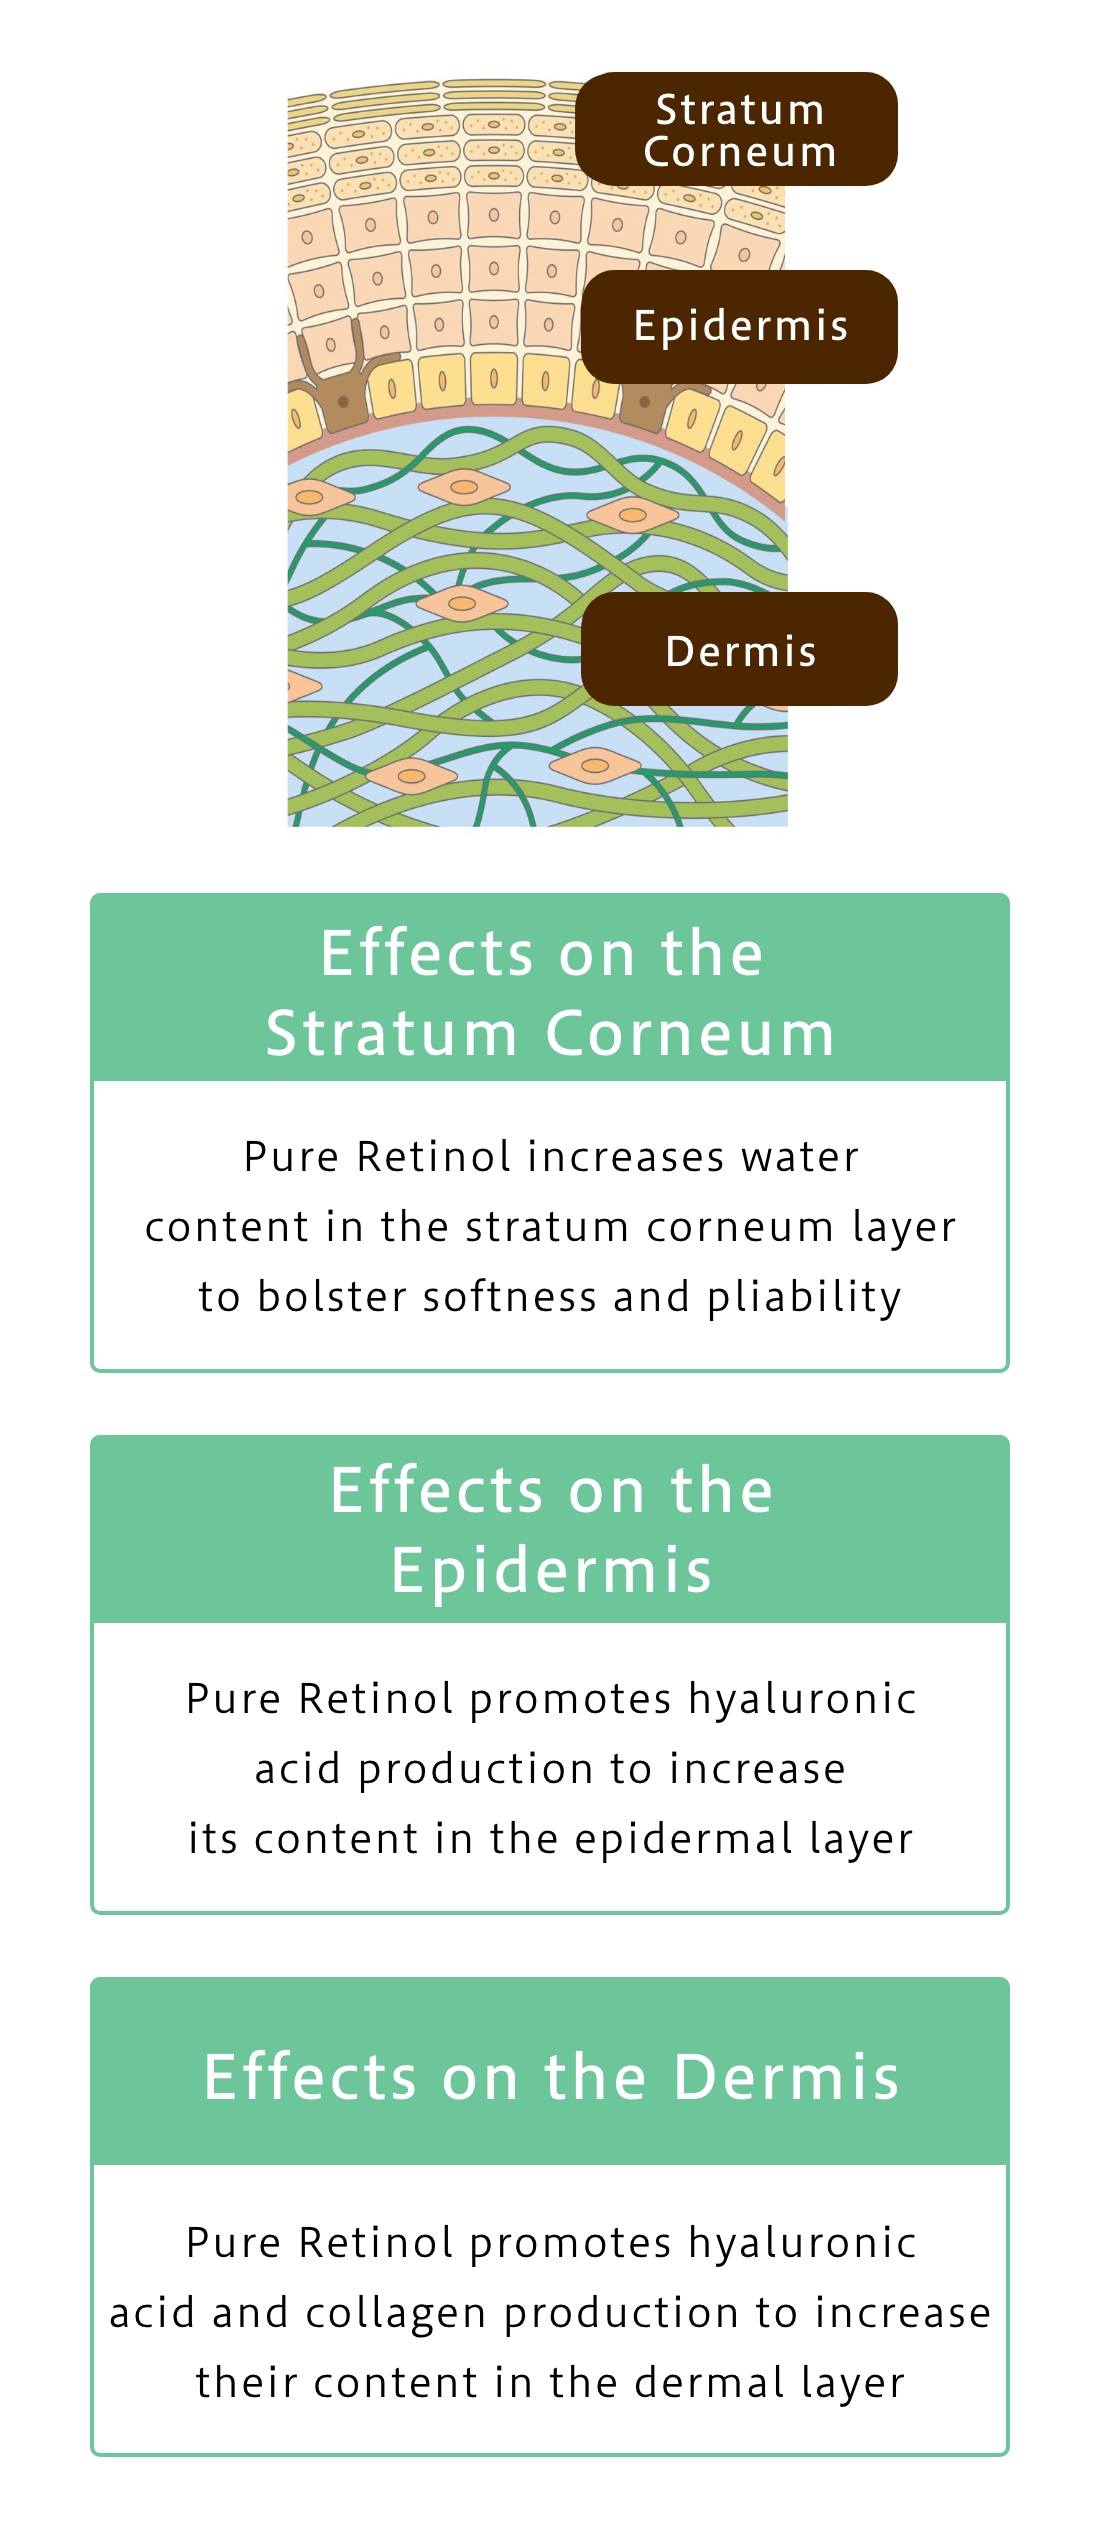 Pure Retinol provides total care that addresses all causal factors in the stratum corneum, epidermal and dermal skin layers, reducing existing wrinkles while mitigating future wrinkle formation.